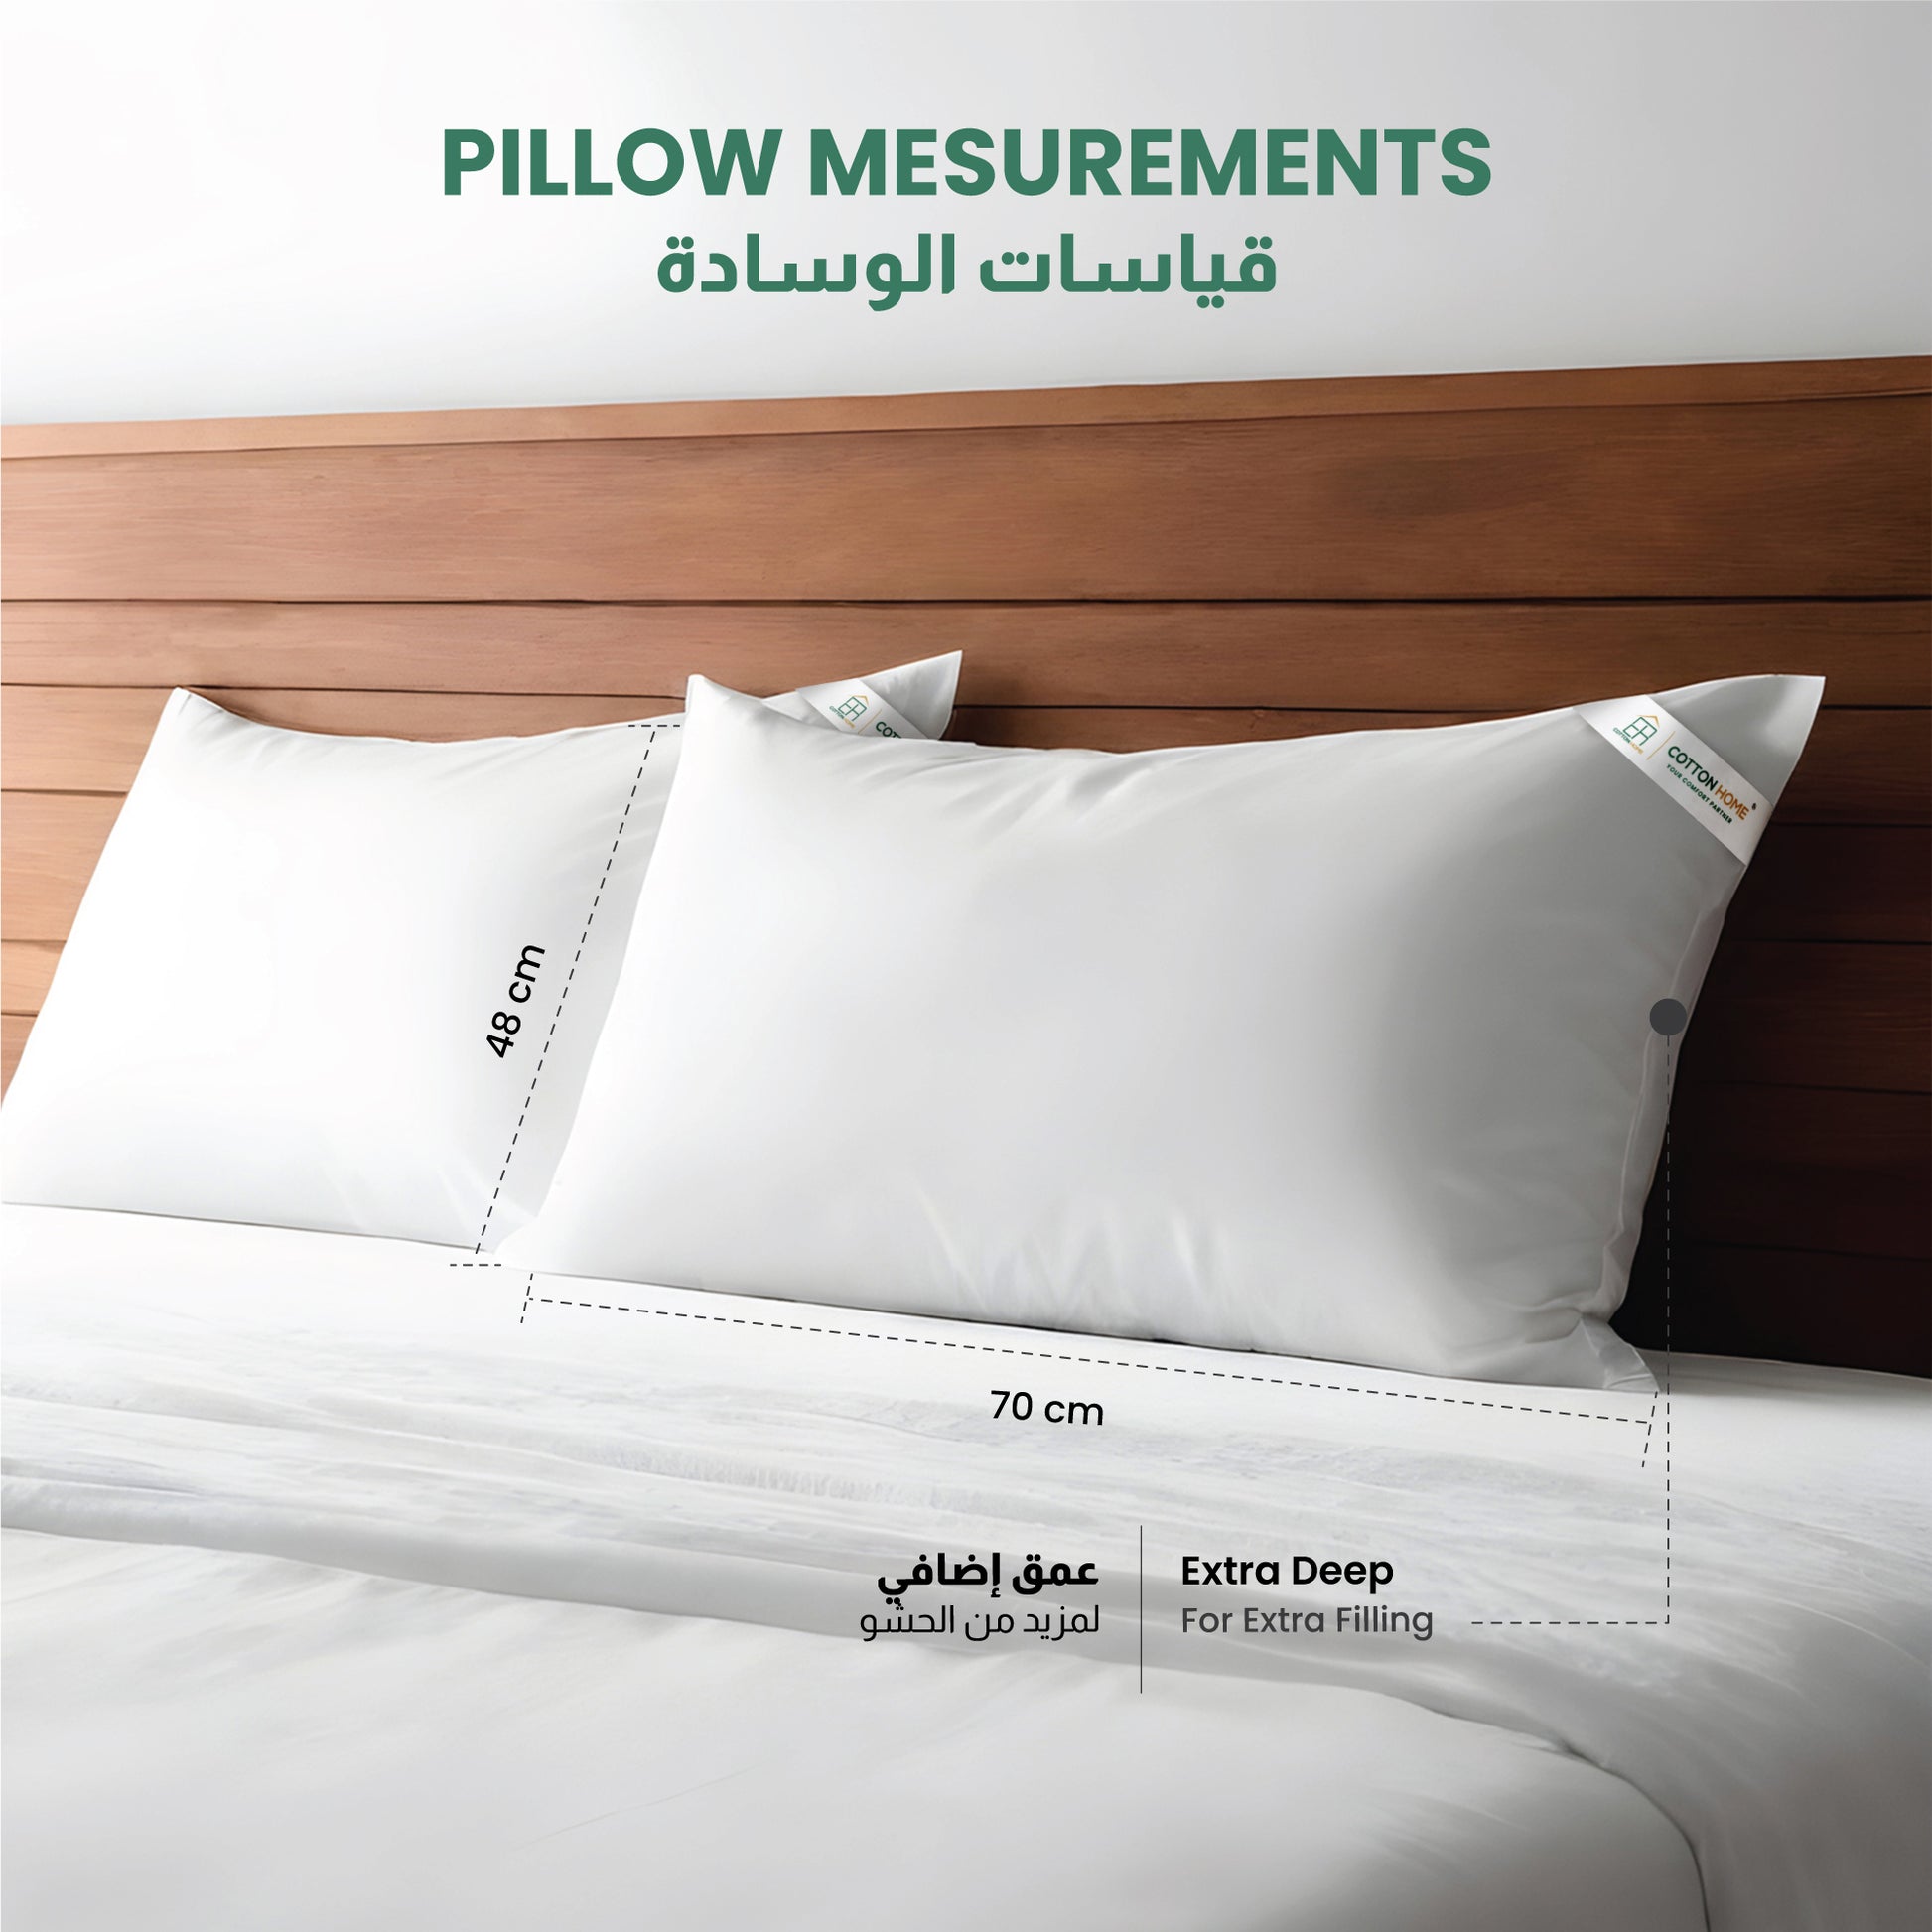 Premium Quality Light Weight Majestic Pillow Suitable for Back Sleeper and Side Sleeper Pillow 48x70 cm